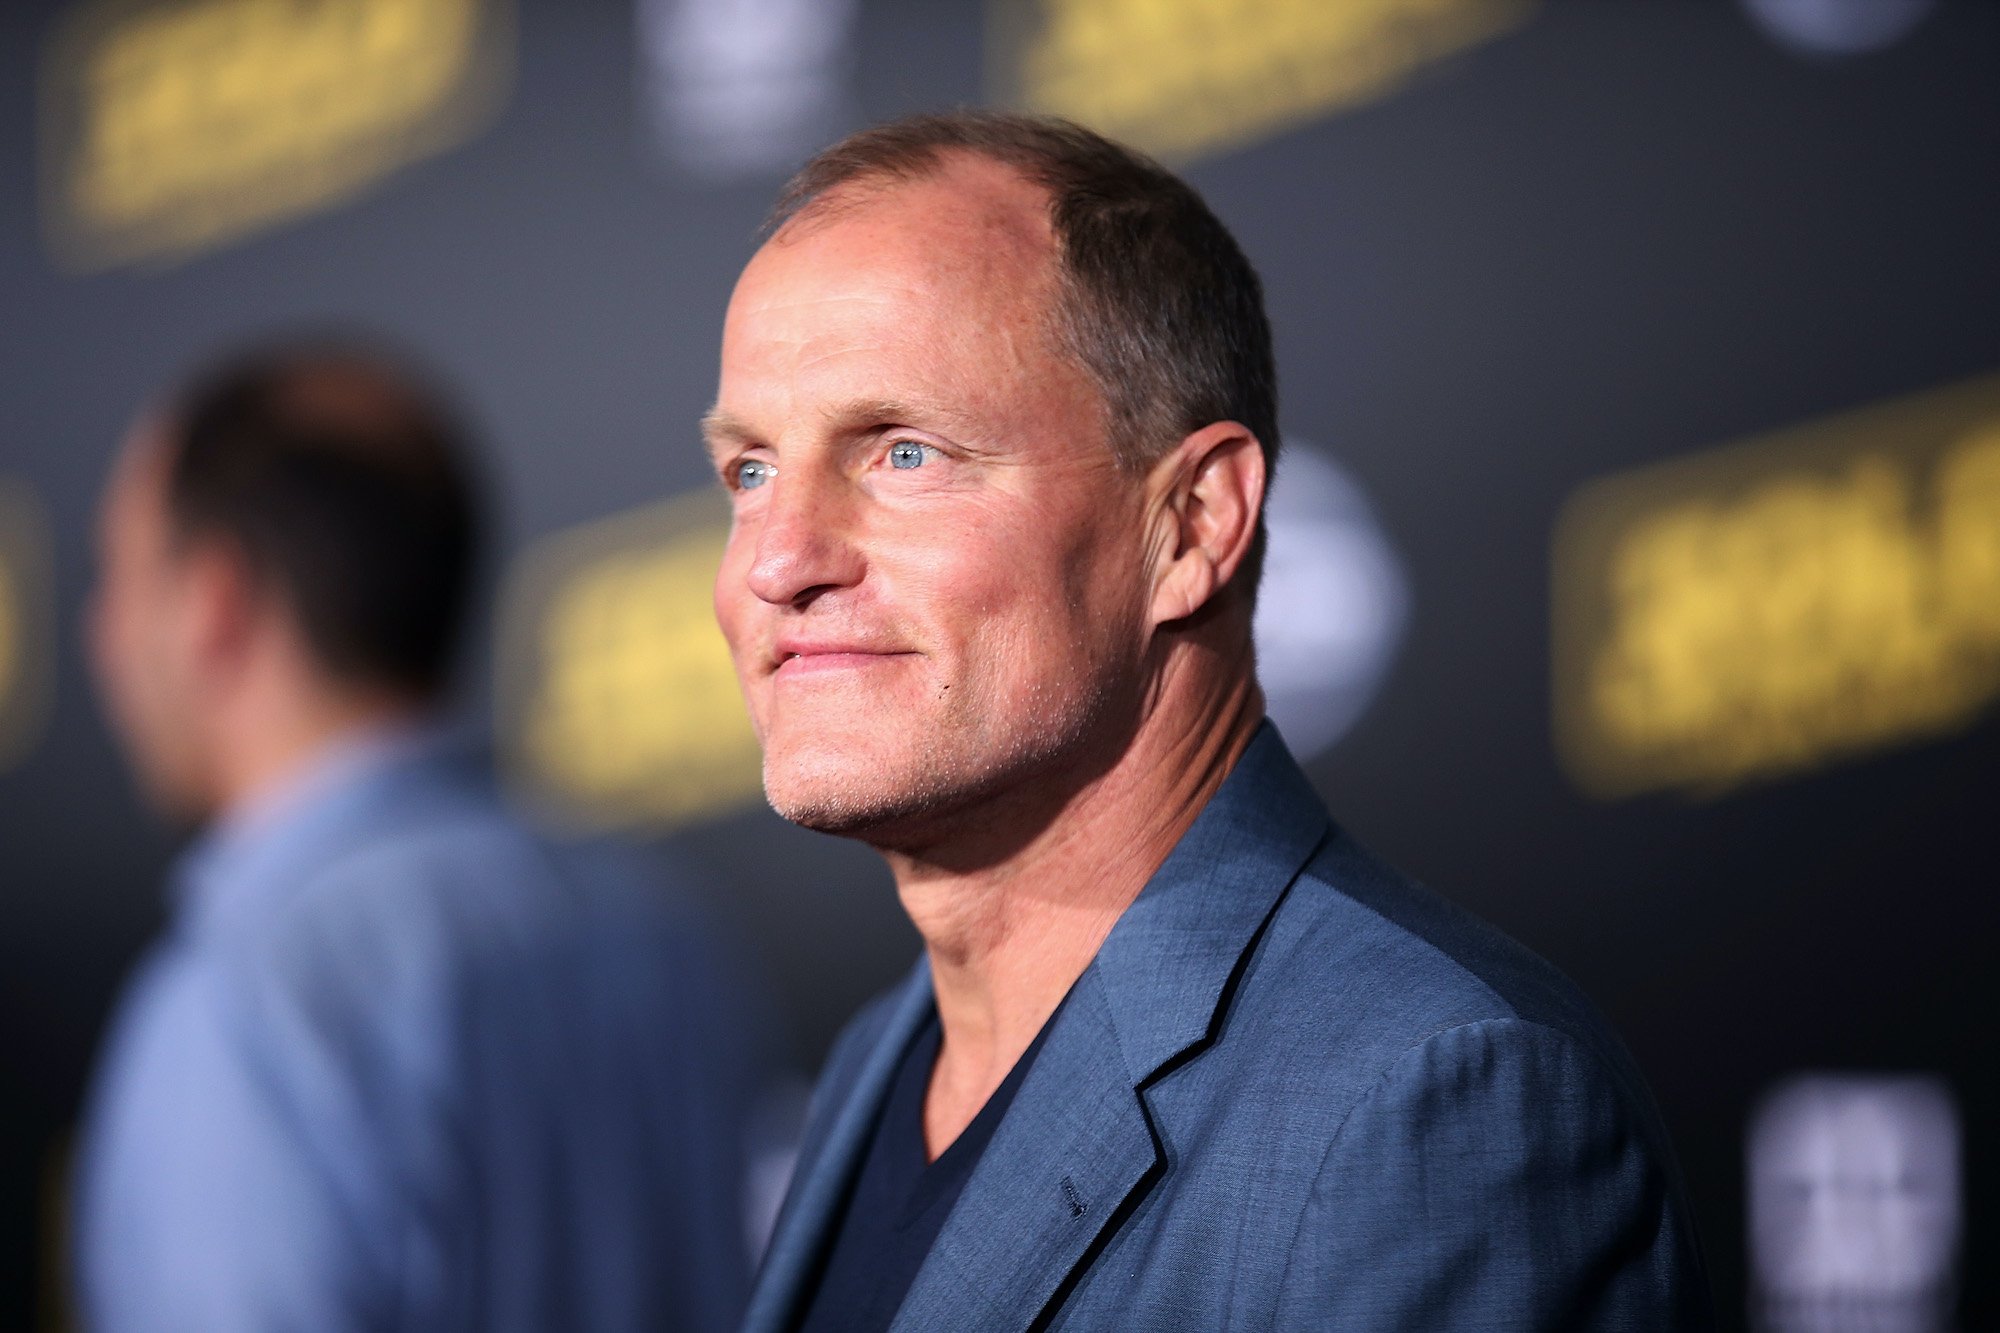 Cheers': Woody Harrelson Cried During His Audition and Never Looked Back